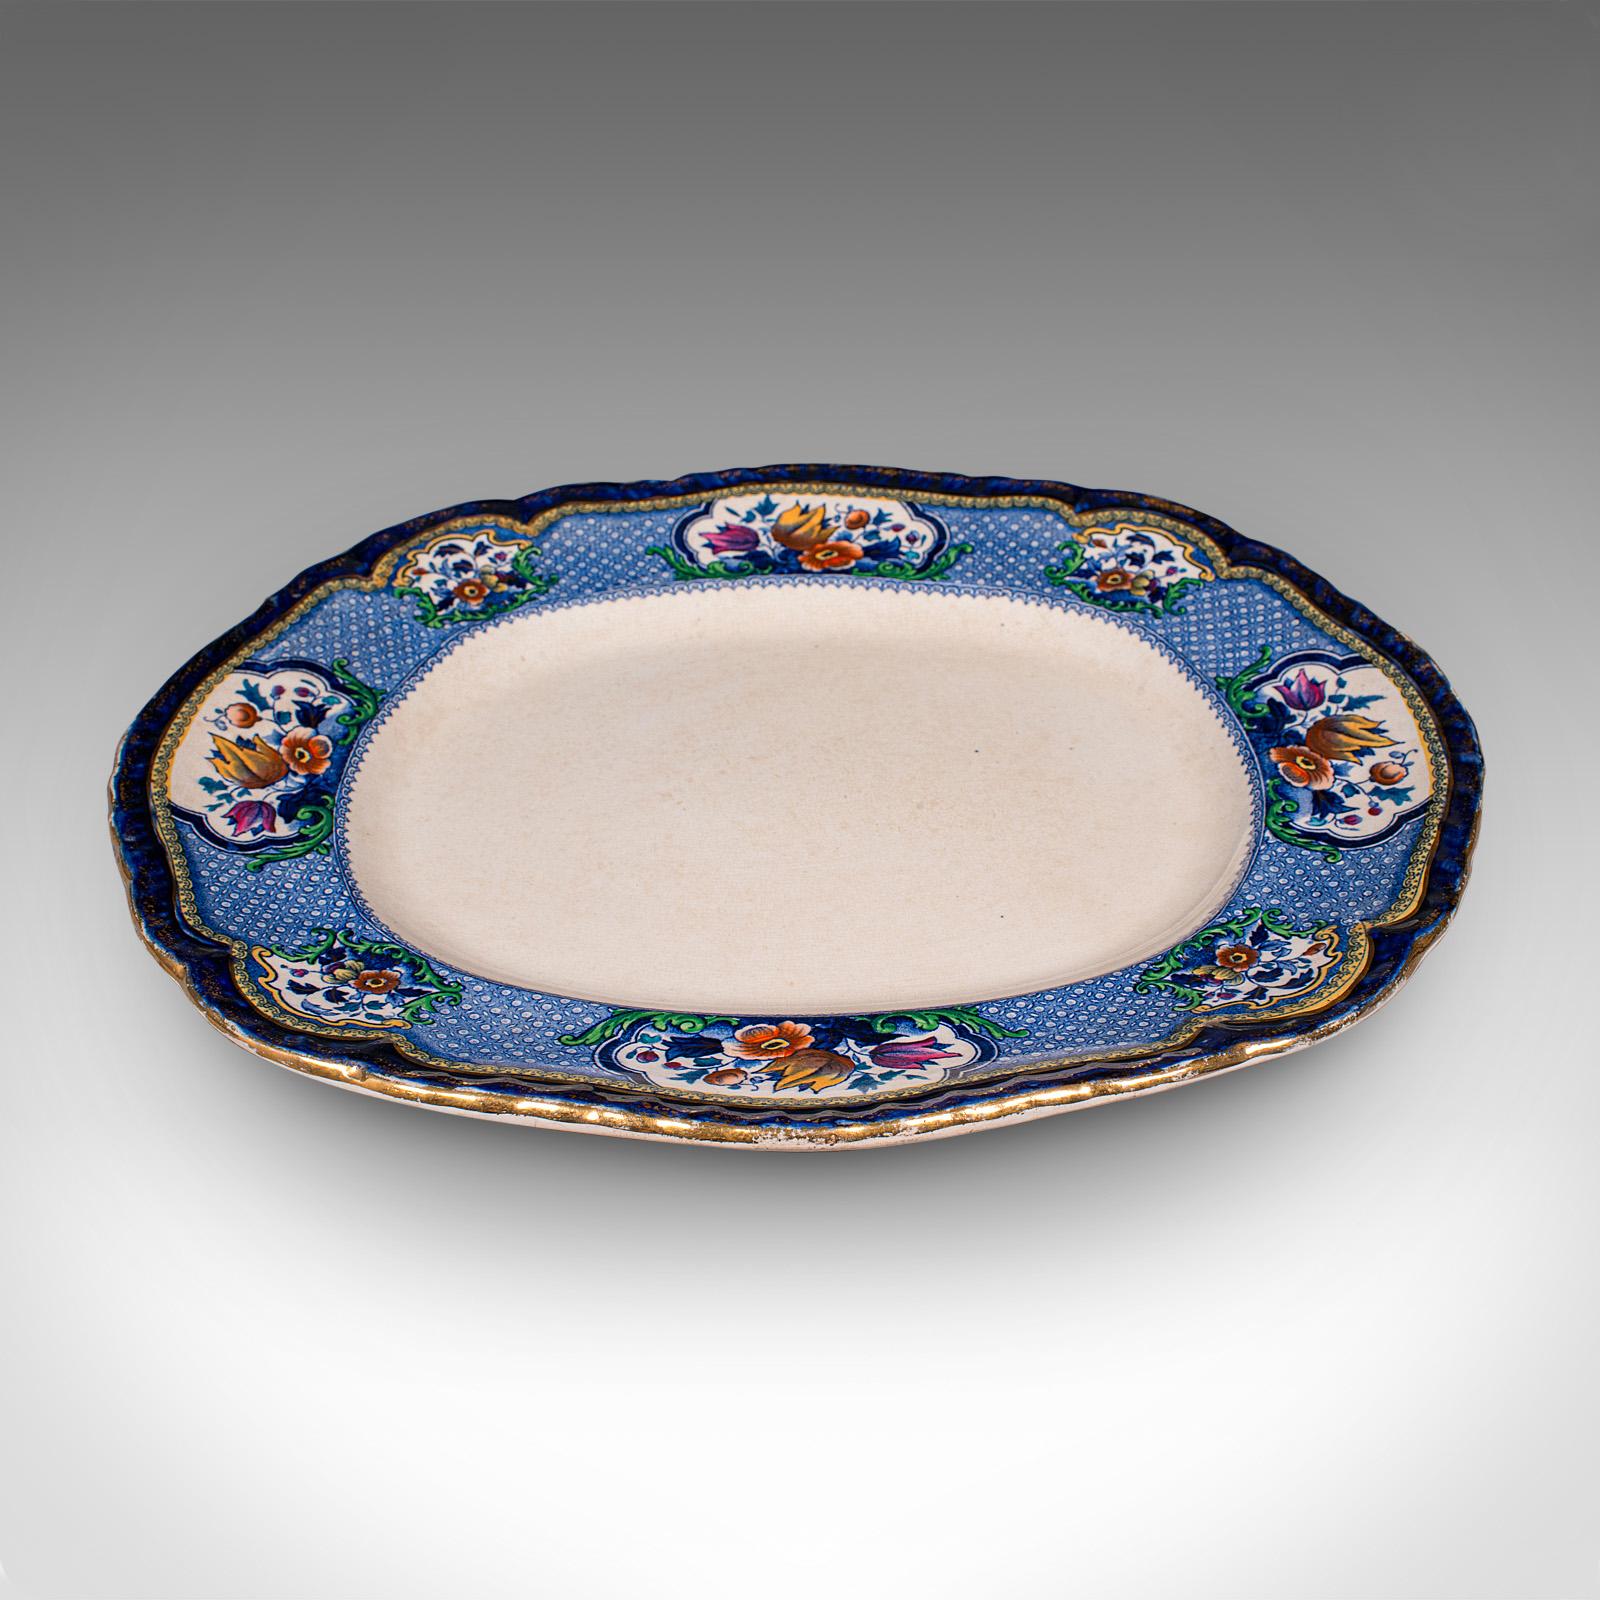 Set of 2 Large Antique Meat & Poultry Platters, English Ceramic, Victorian, 1900 For Sale 1